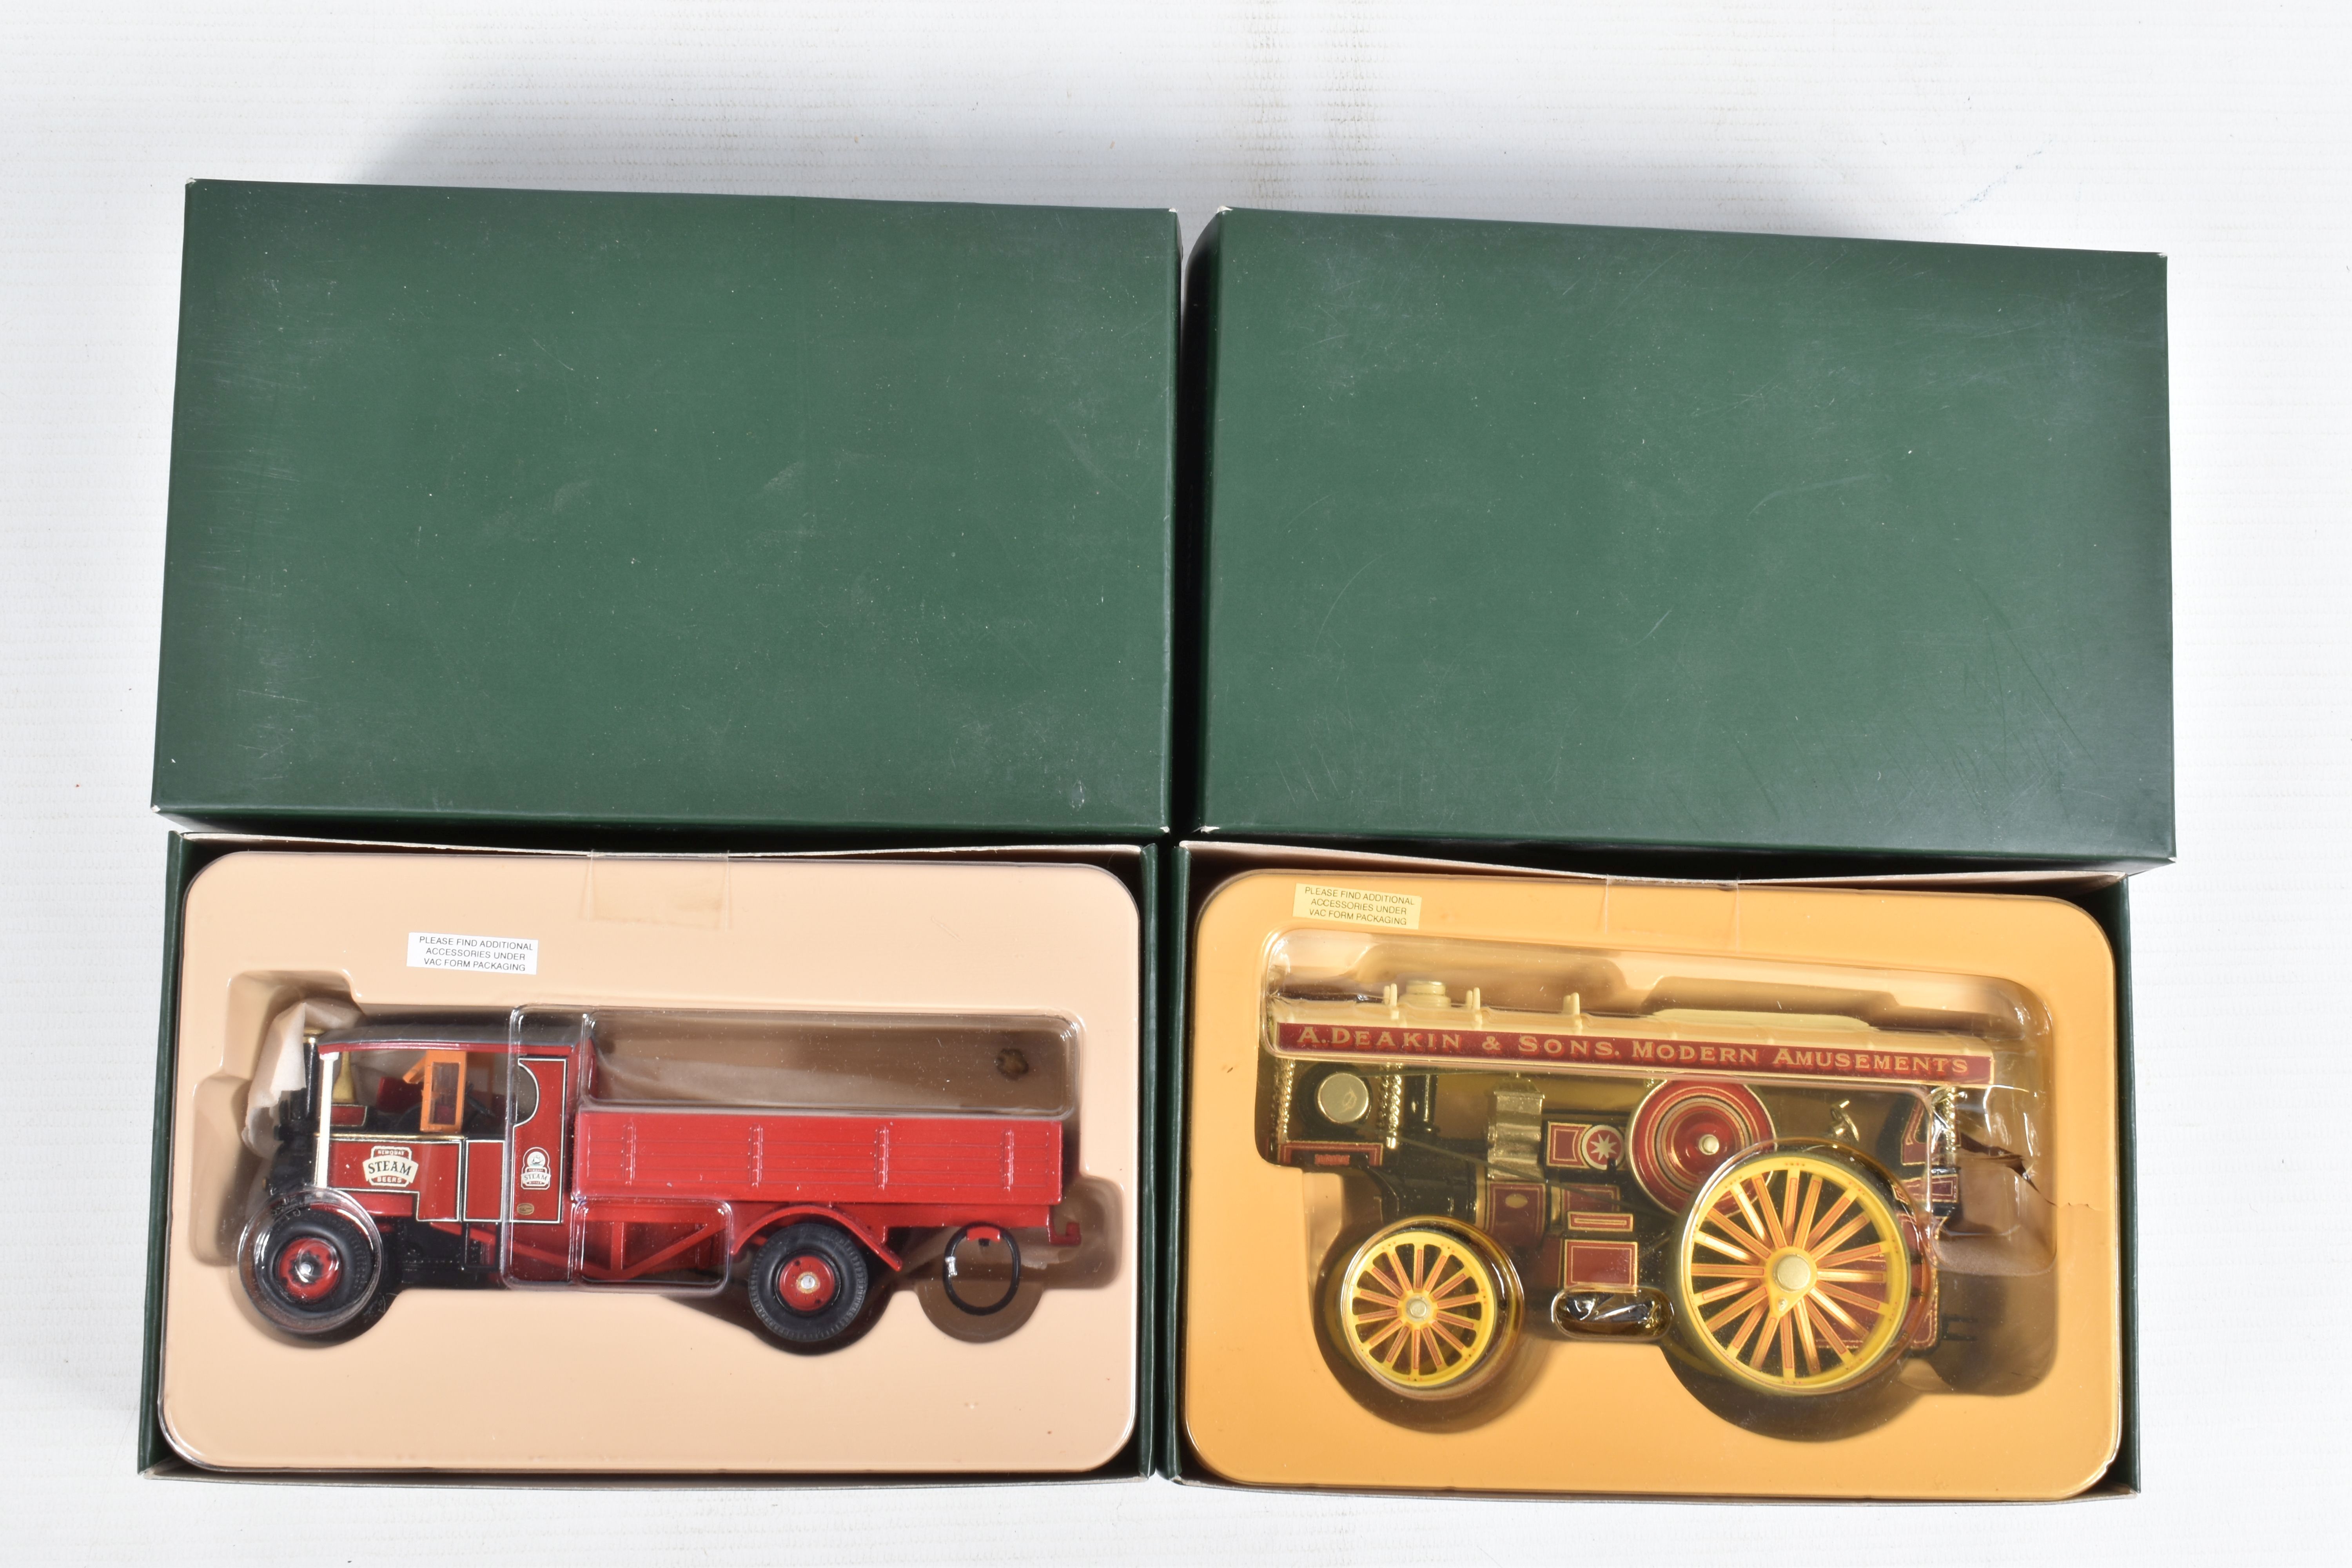 FIVE BOXED DIECAST CORGI STEAM ENGINE MODELS, to include a Sentinel drop side waggon - Express - Bild 2 aus 4